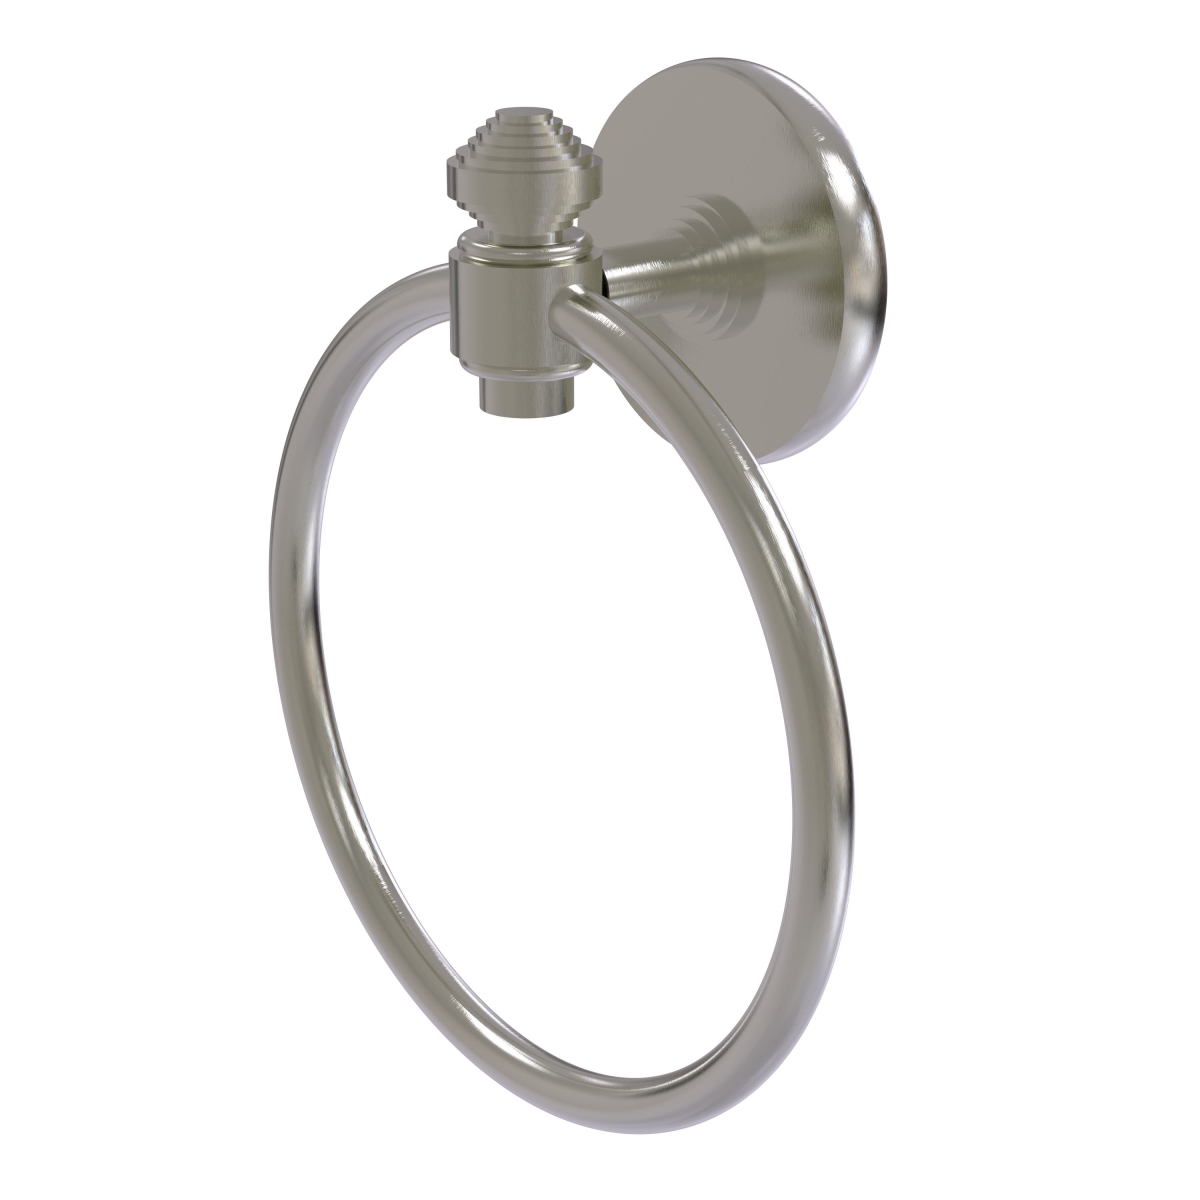 SB-16-SN Southbeach Collection Towel Ring, Satin Nickel